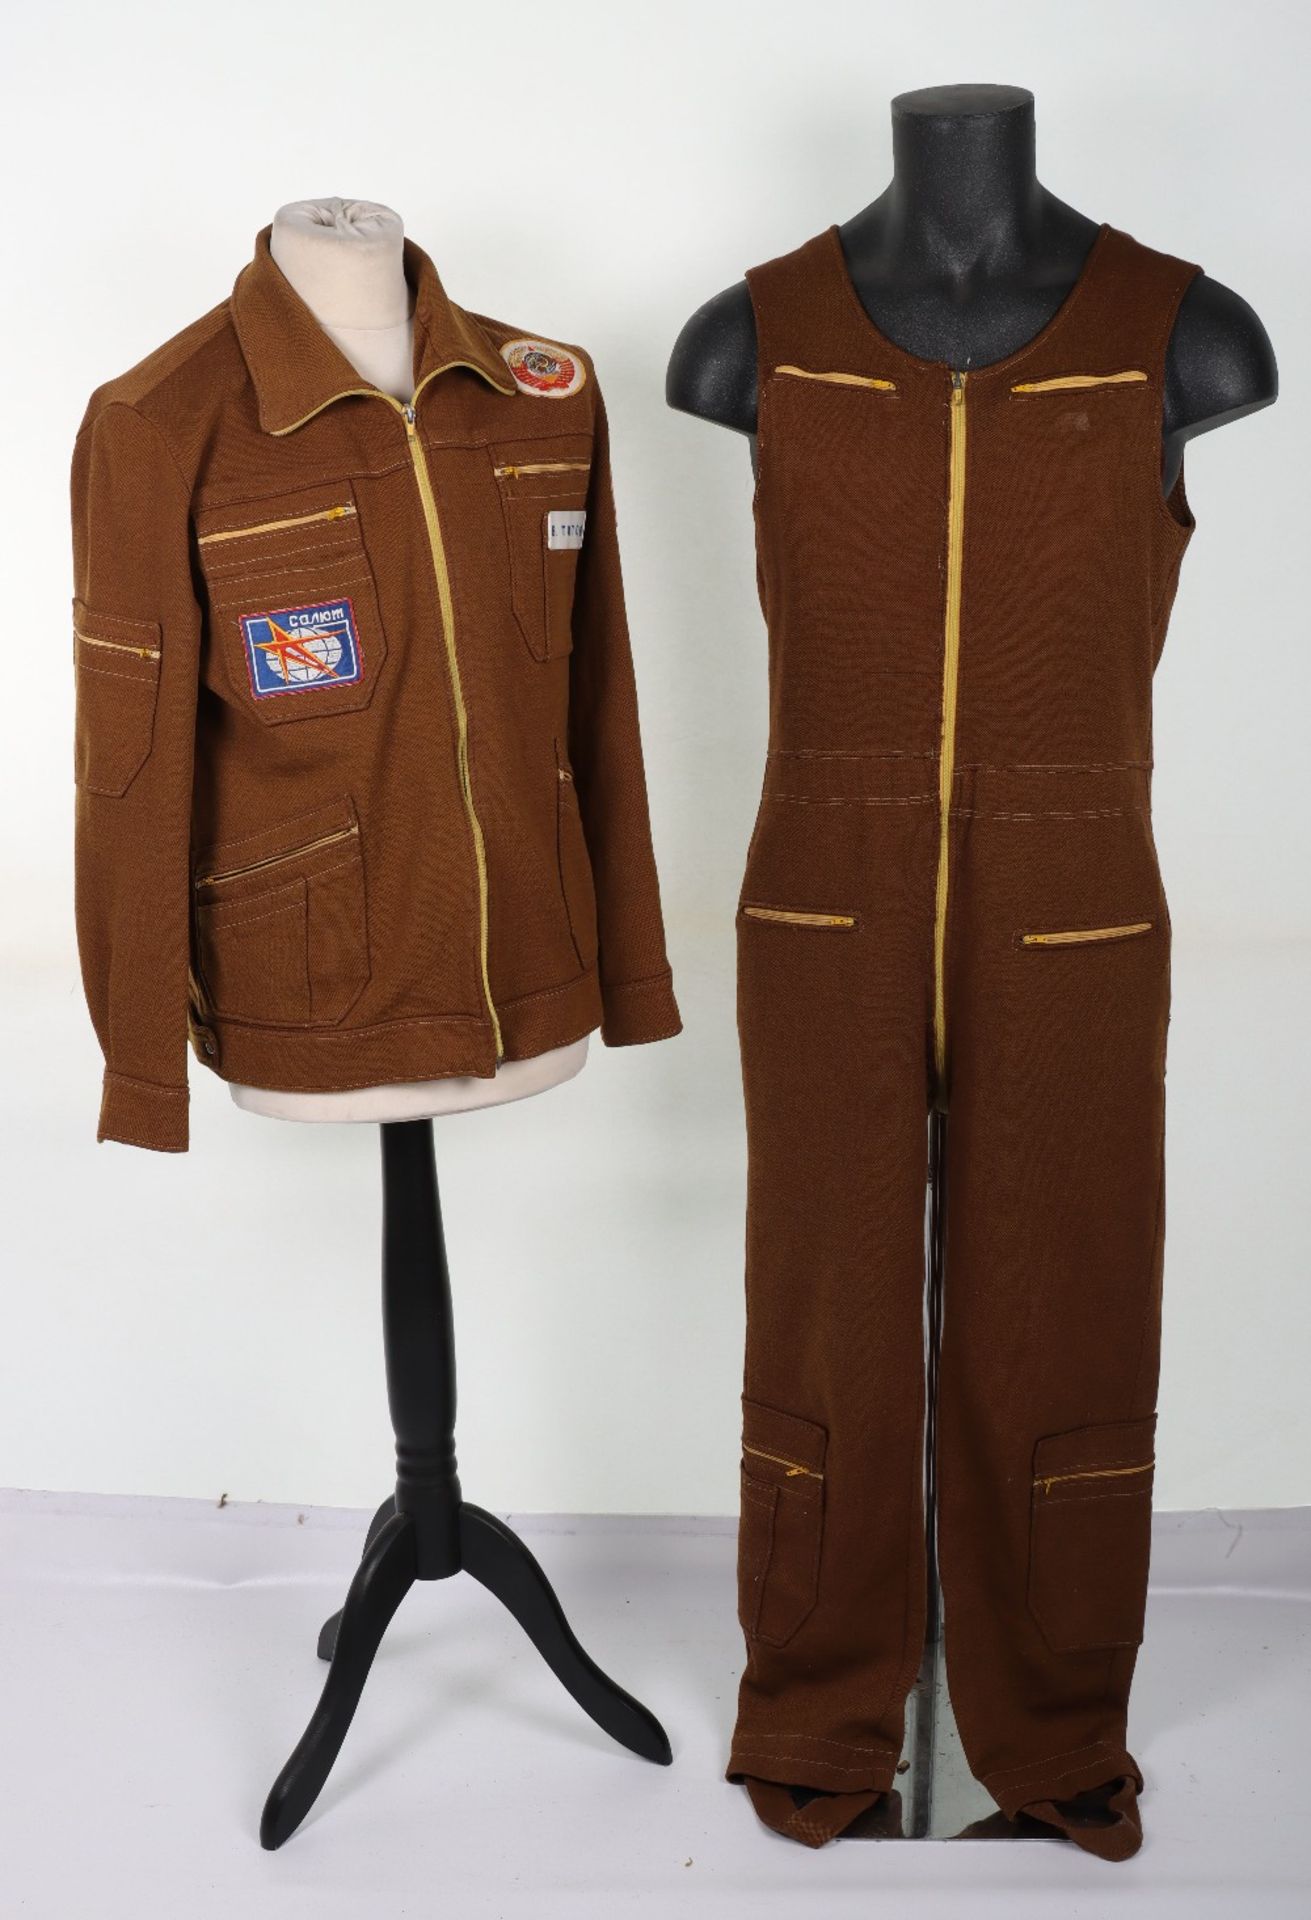 Very Unusual Soviet Russian Astronauts Flight Suit of Vladimir Titov, Who was on the Failed Mission